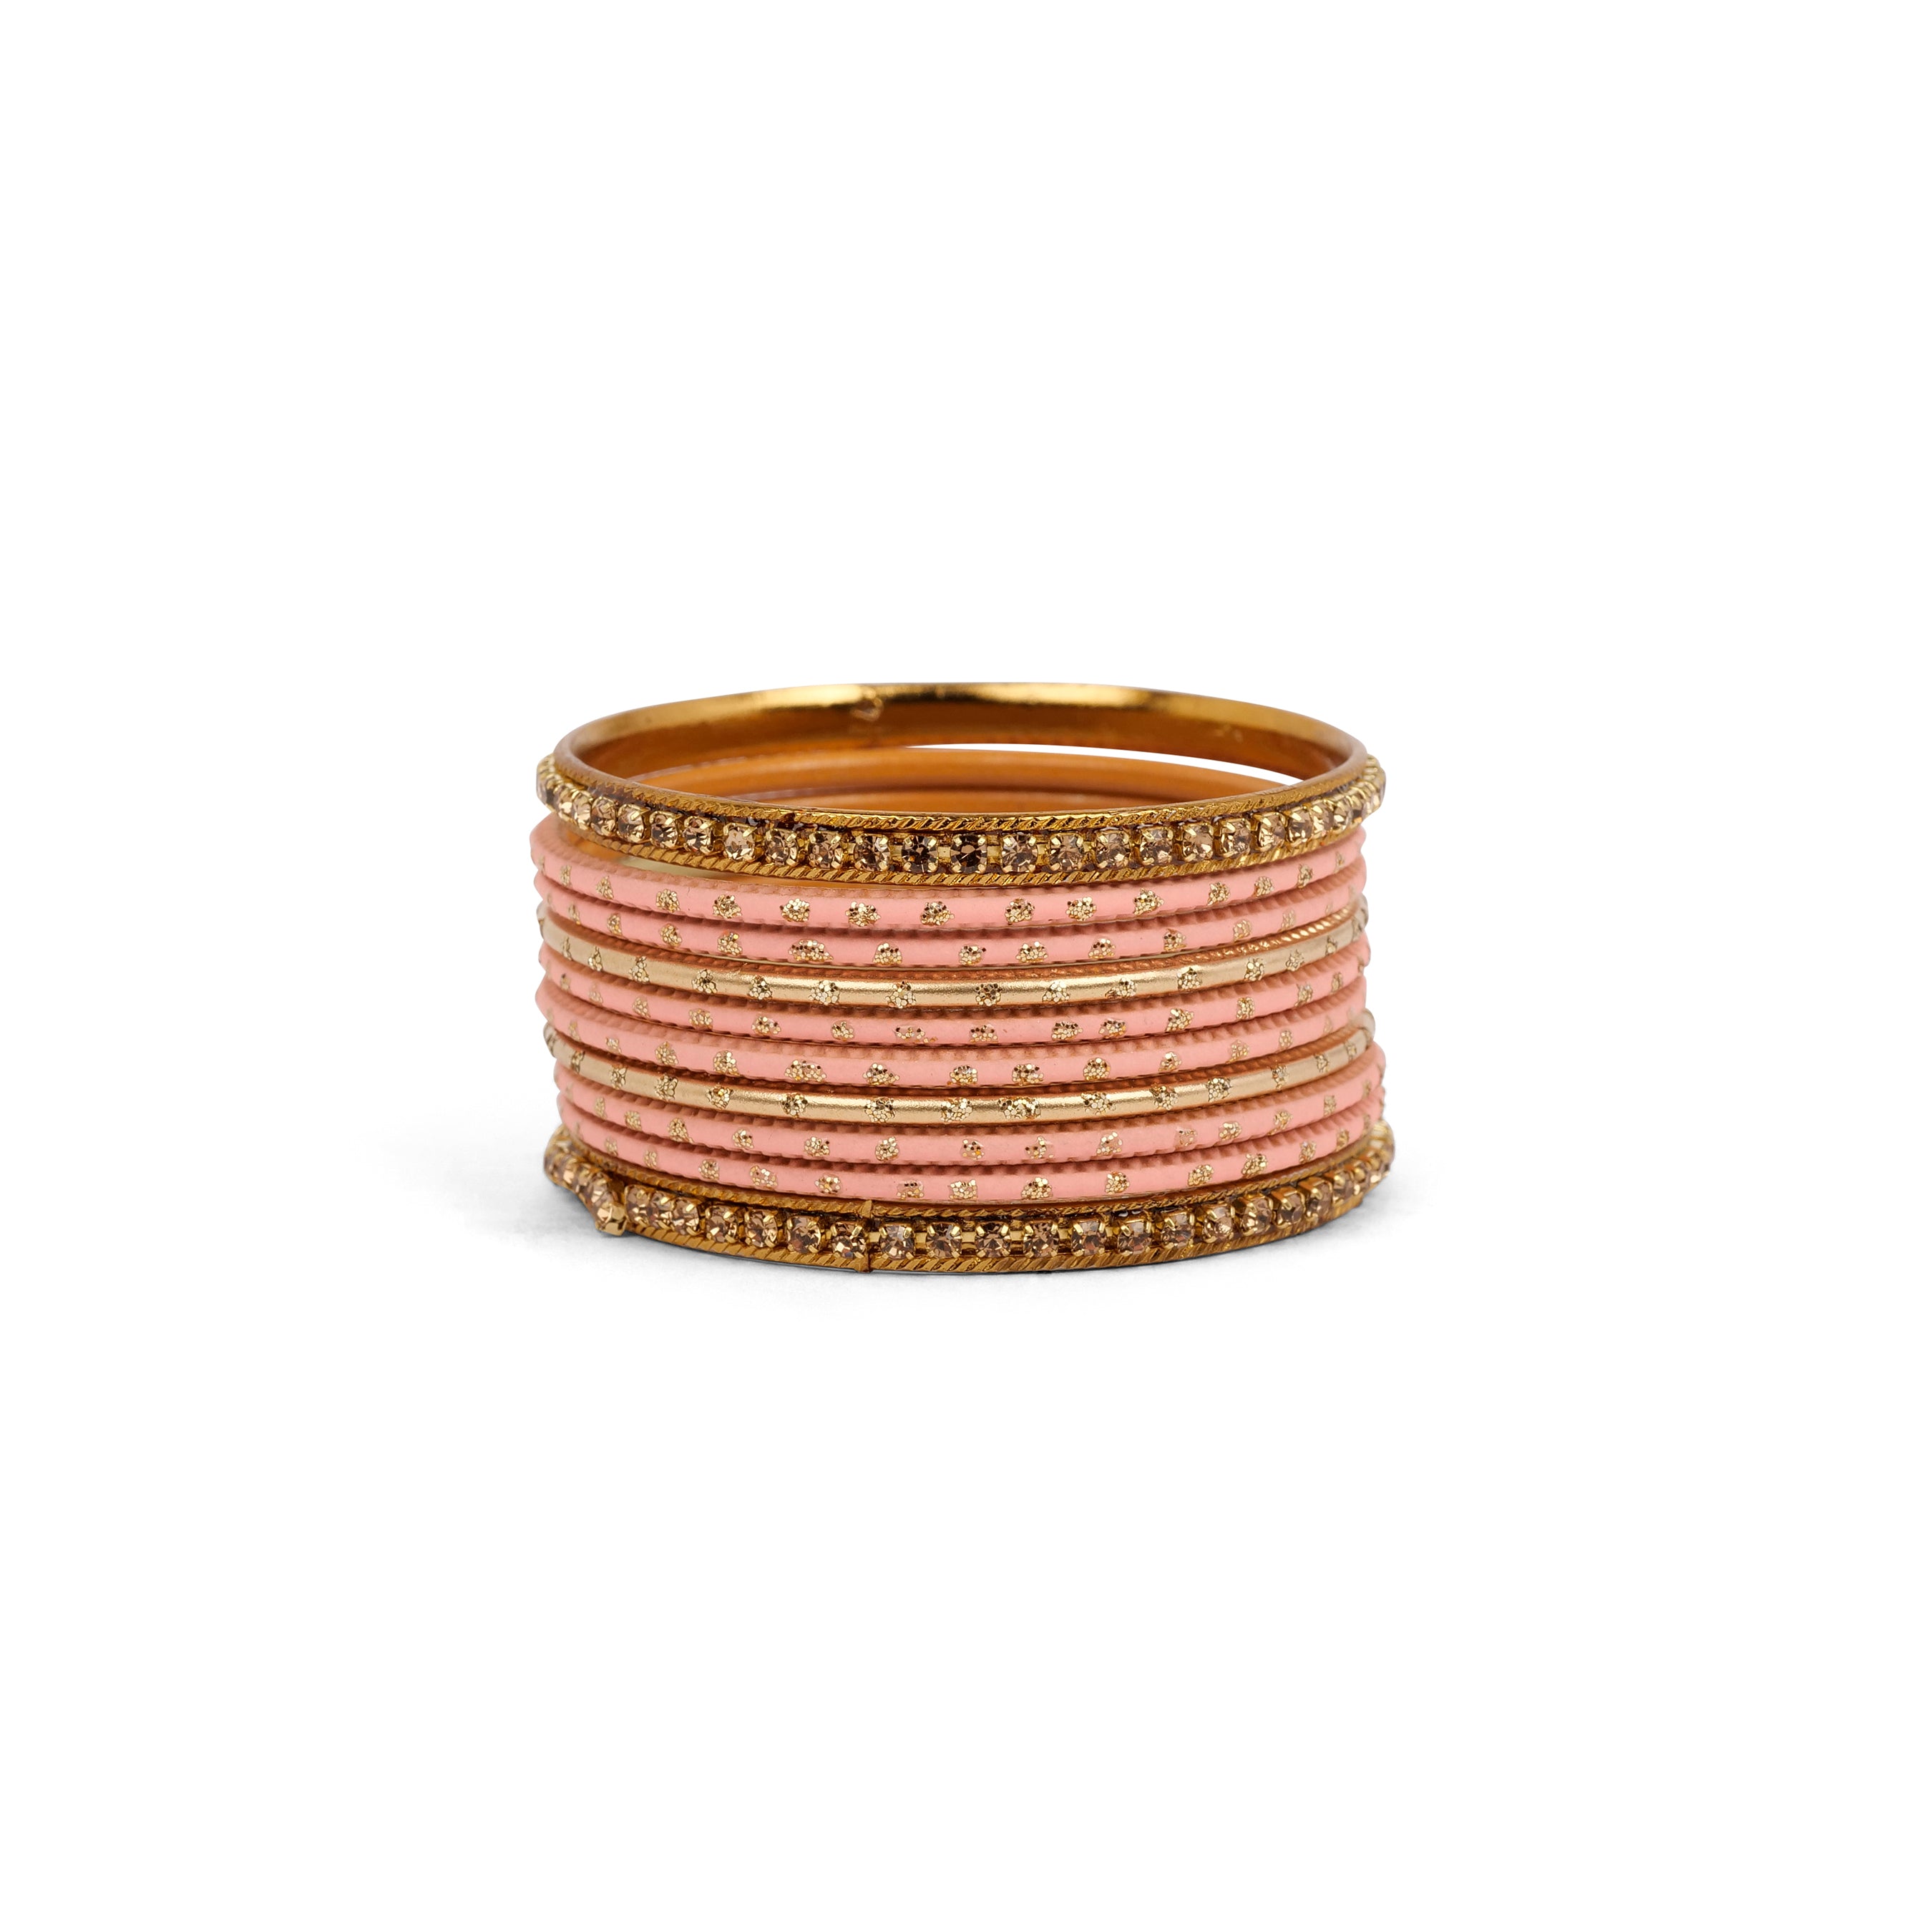 Children's Bangle Set in Peach and Antique Gold